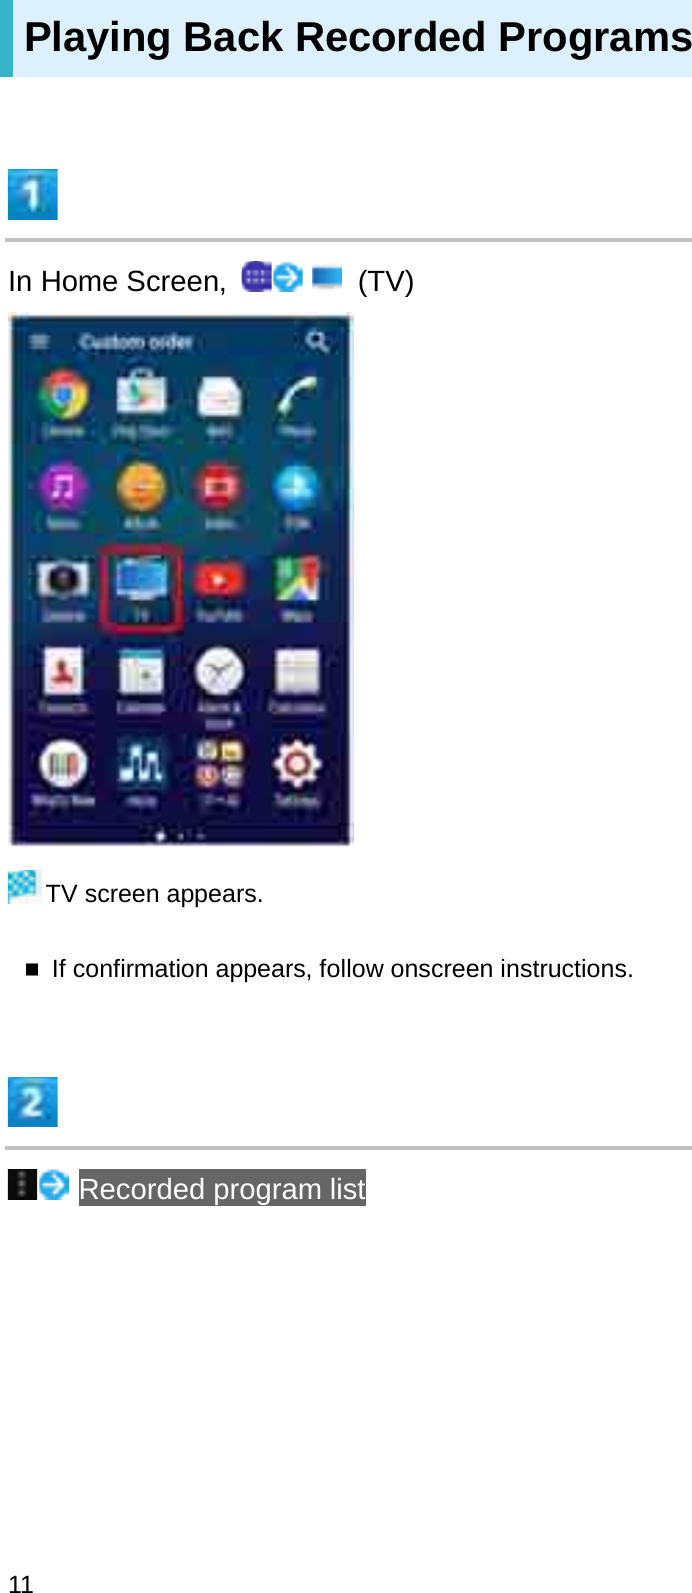 Playing Back Recorded ProgramsIn Home Screen,  (TV)TV screen appears.If confirmation appears, follow onscreen instructions.Recorded program list11